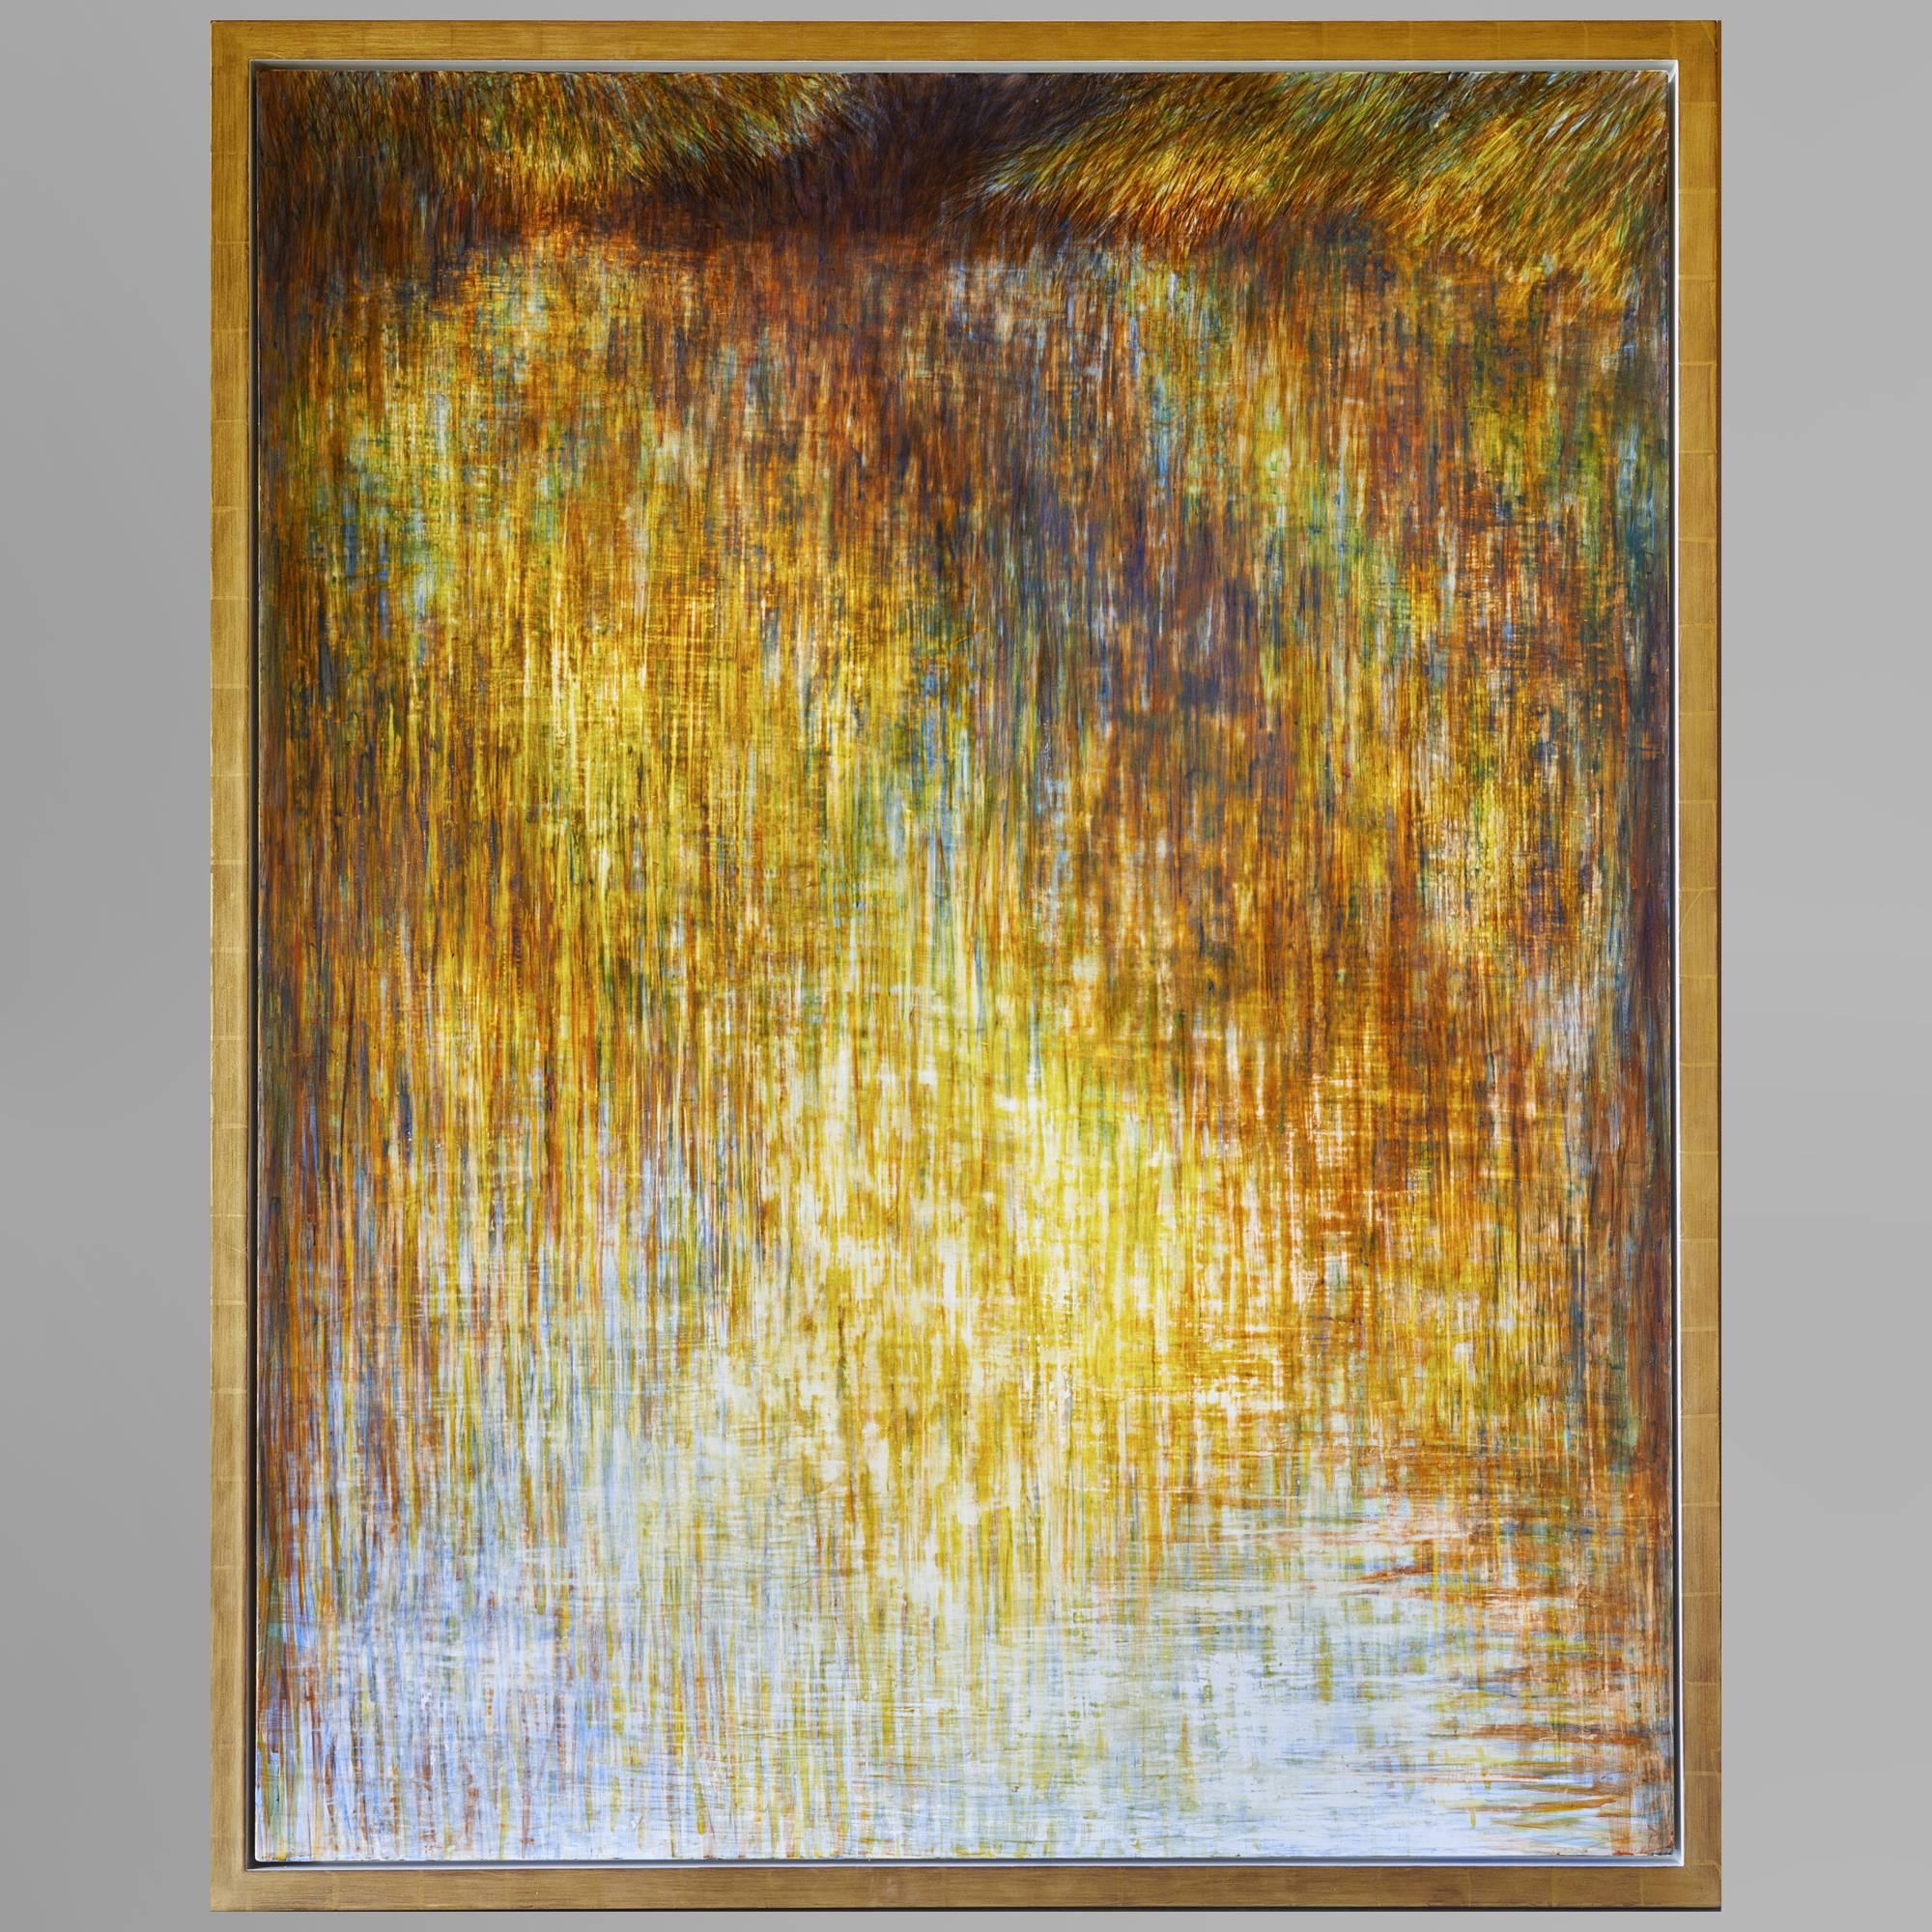 Rupert Muldoon. 

Egg tempera on gesso panel in gilt frame.  

Trees with yellow and golden autumnal leaves reflected in the water.

Rupert Muldoon: 
